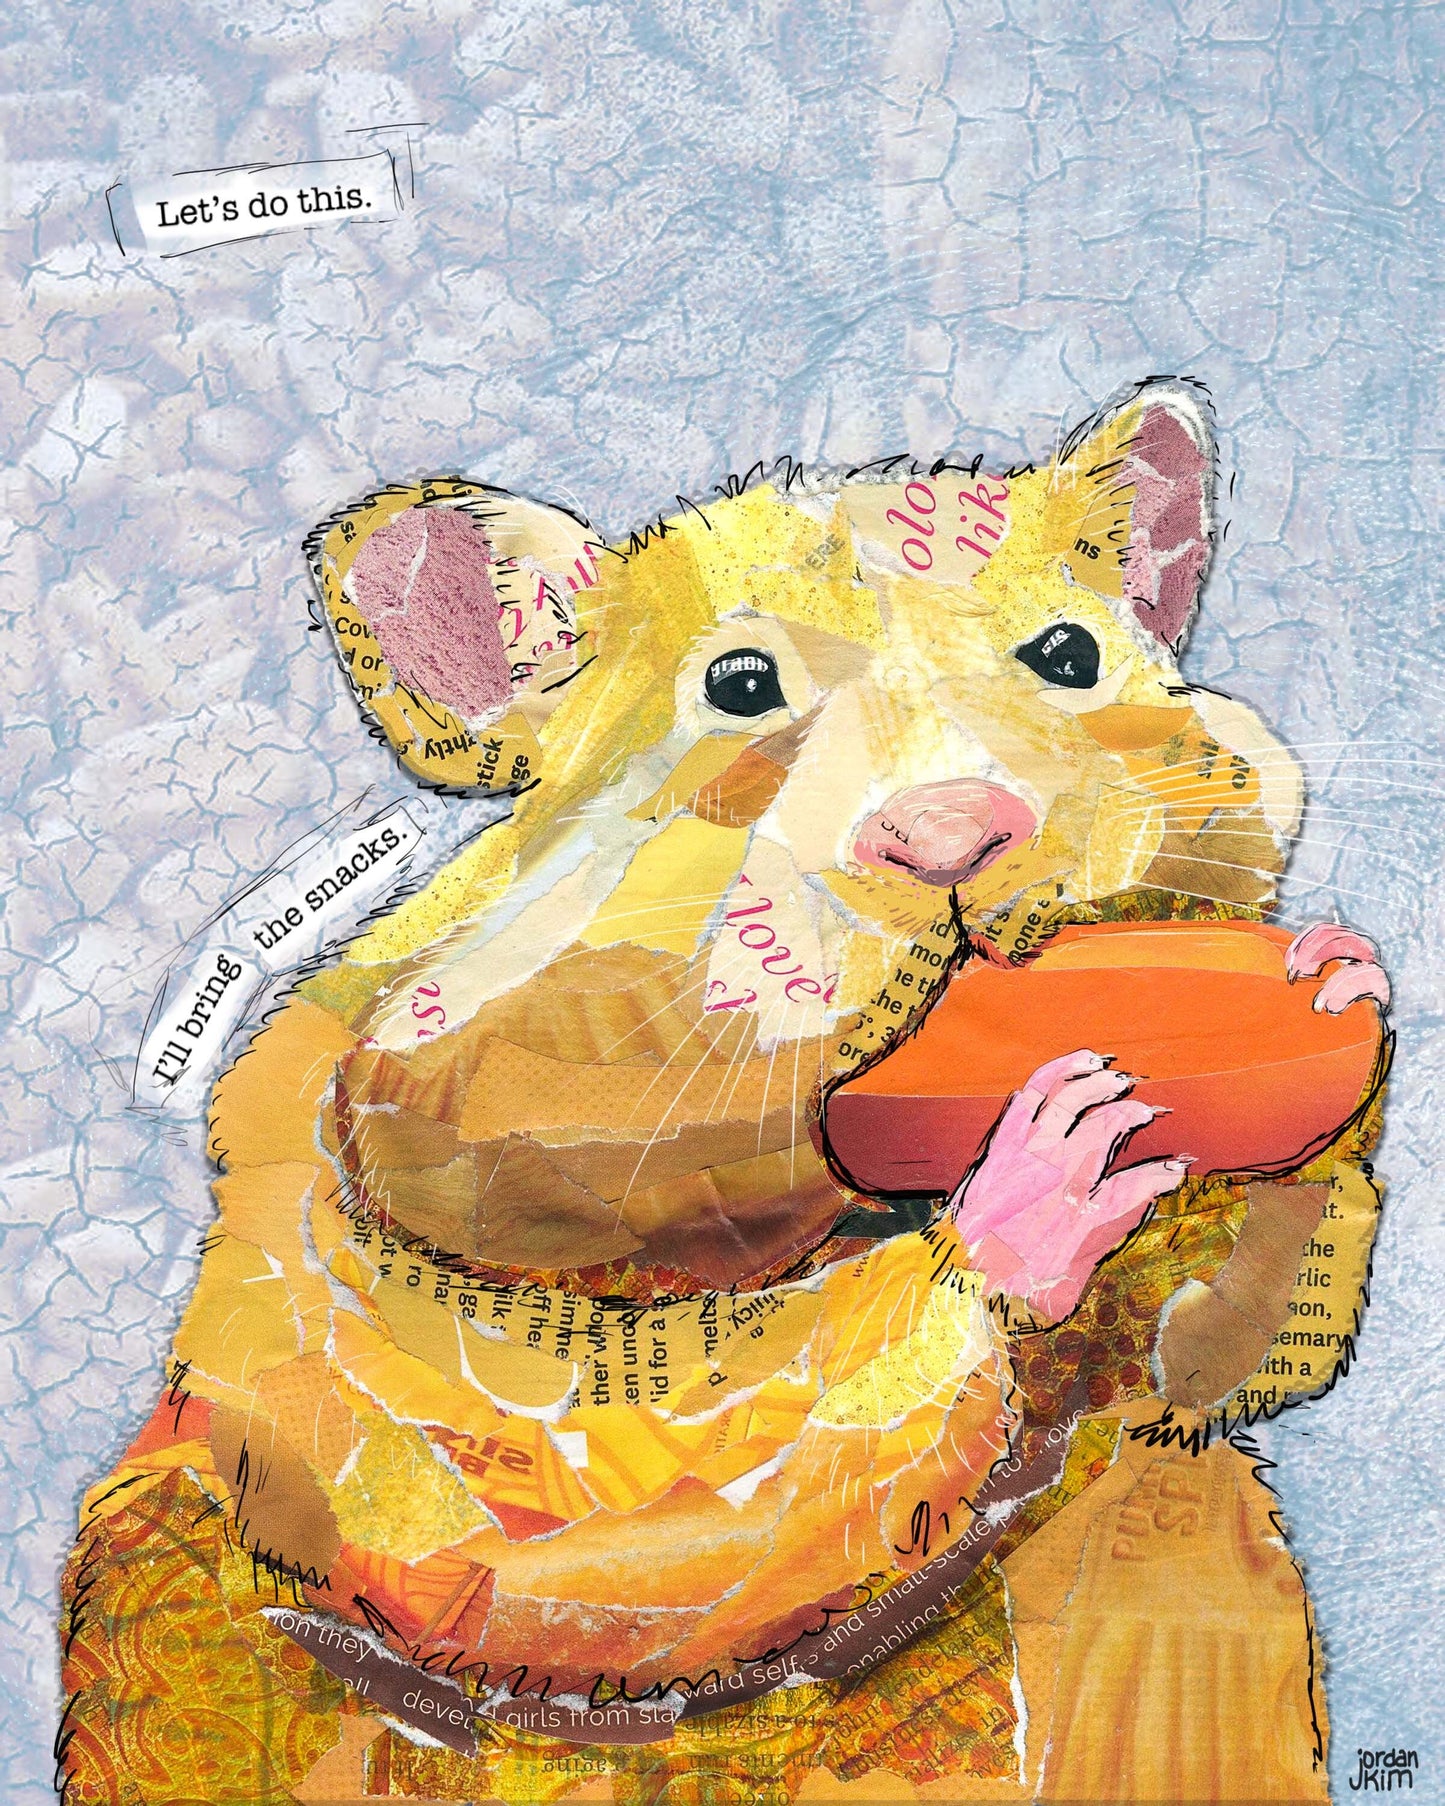 Greeting Card of mixed media collage of a blond Hamster, pets, snacks, funny text outside, Blank Inside